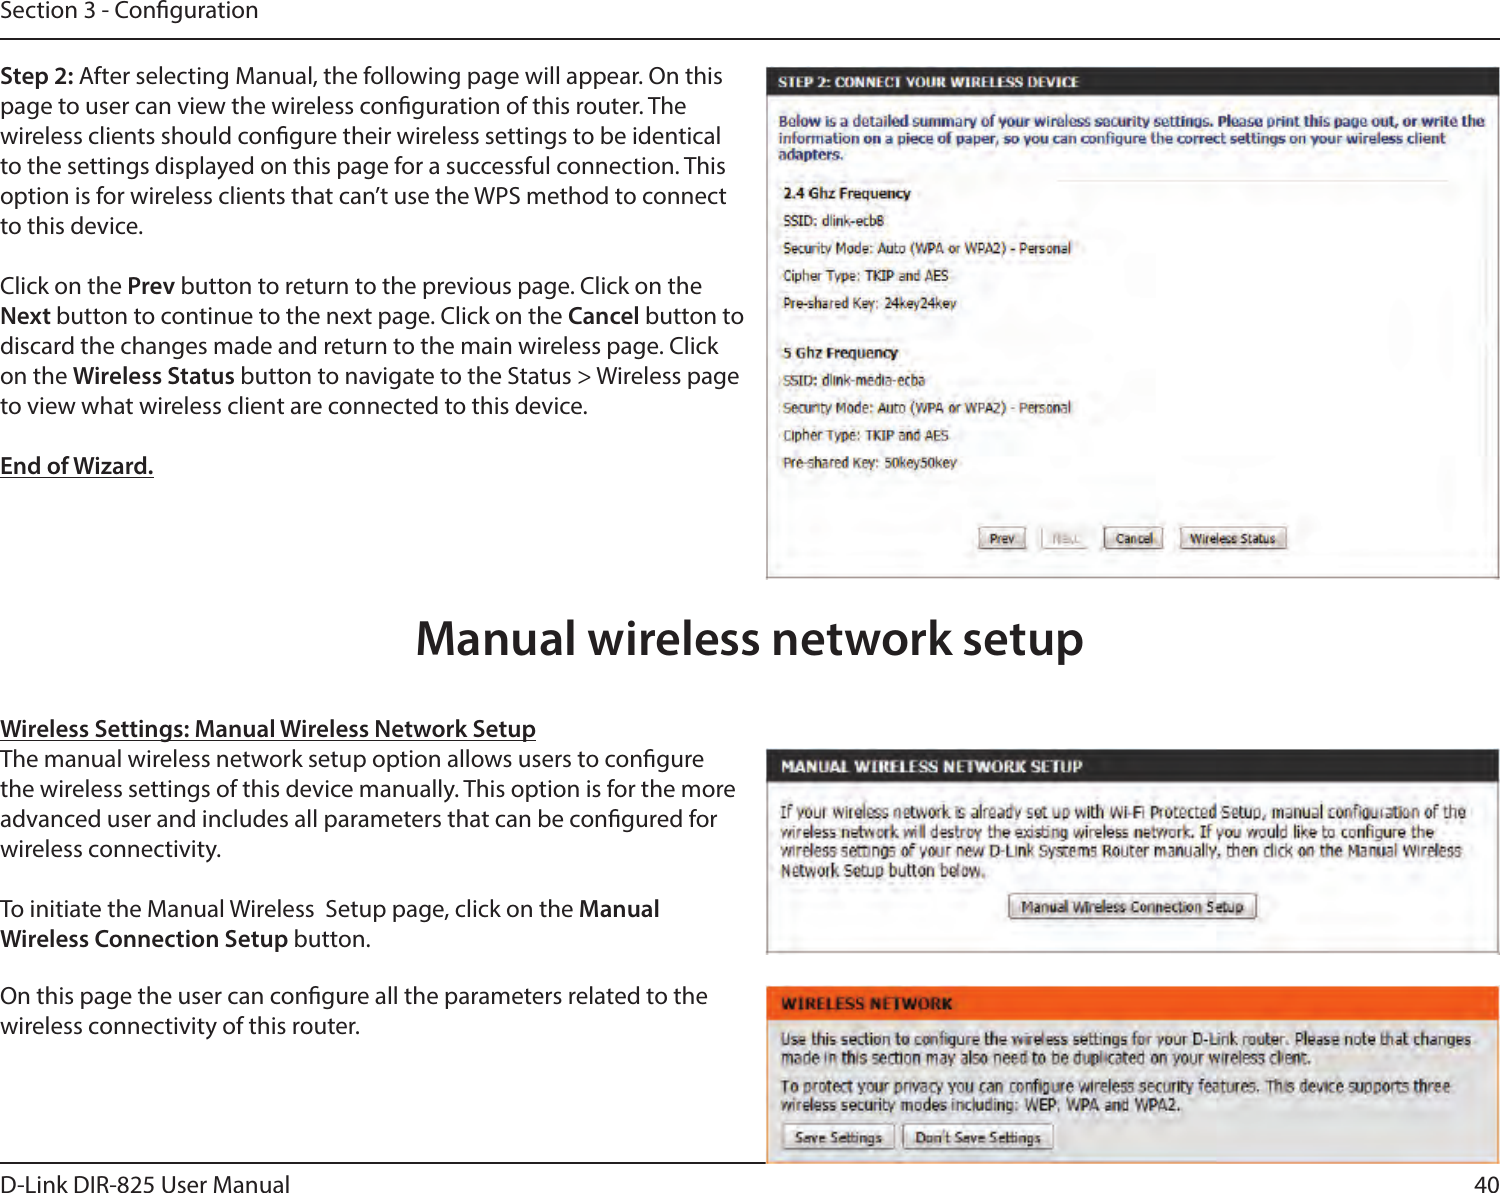 40D-Link DIR-825 User ManualSection 3 - CongurationStep 2: After selecting Manual, the following page will appear. On this page to user can view the wireless conguration of this router. The  wireless clients should congure their wireless settings to be identical to the settings displayed on this page for a successful connection. This option is for wireless clients that can’t use the WPS method to connect to this device.Click on the Prev button to return to the previous page. Click on the Next button to continue to the next page. Click on the Cancel button to discard the changes made and return to the main wireless page. Click on the Wireless Status button to navigate to the Status &gt; Wireless page to view what wireless client are connected to this device.End of Wizard.Wireless Settings: Manual Wireless Network SetupThe manual wireless network setup option allows users to congure the wireless settings of this device manually. This option is for the more advanced user and includes all parameters that can be congured for wireless connectivity.To initiate the Manual Wireless  Setup page, click on the Manual  Wireless Connection Setup button.On this page the user can congure all the parameters related to the wireless connectivity of this router.Manual wireless network setup